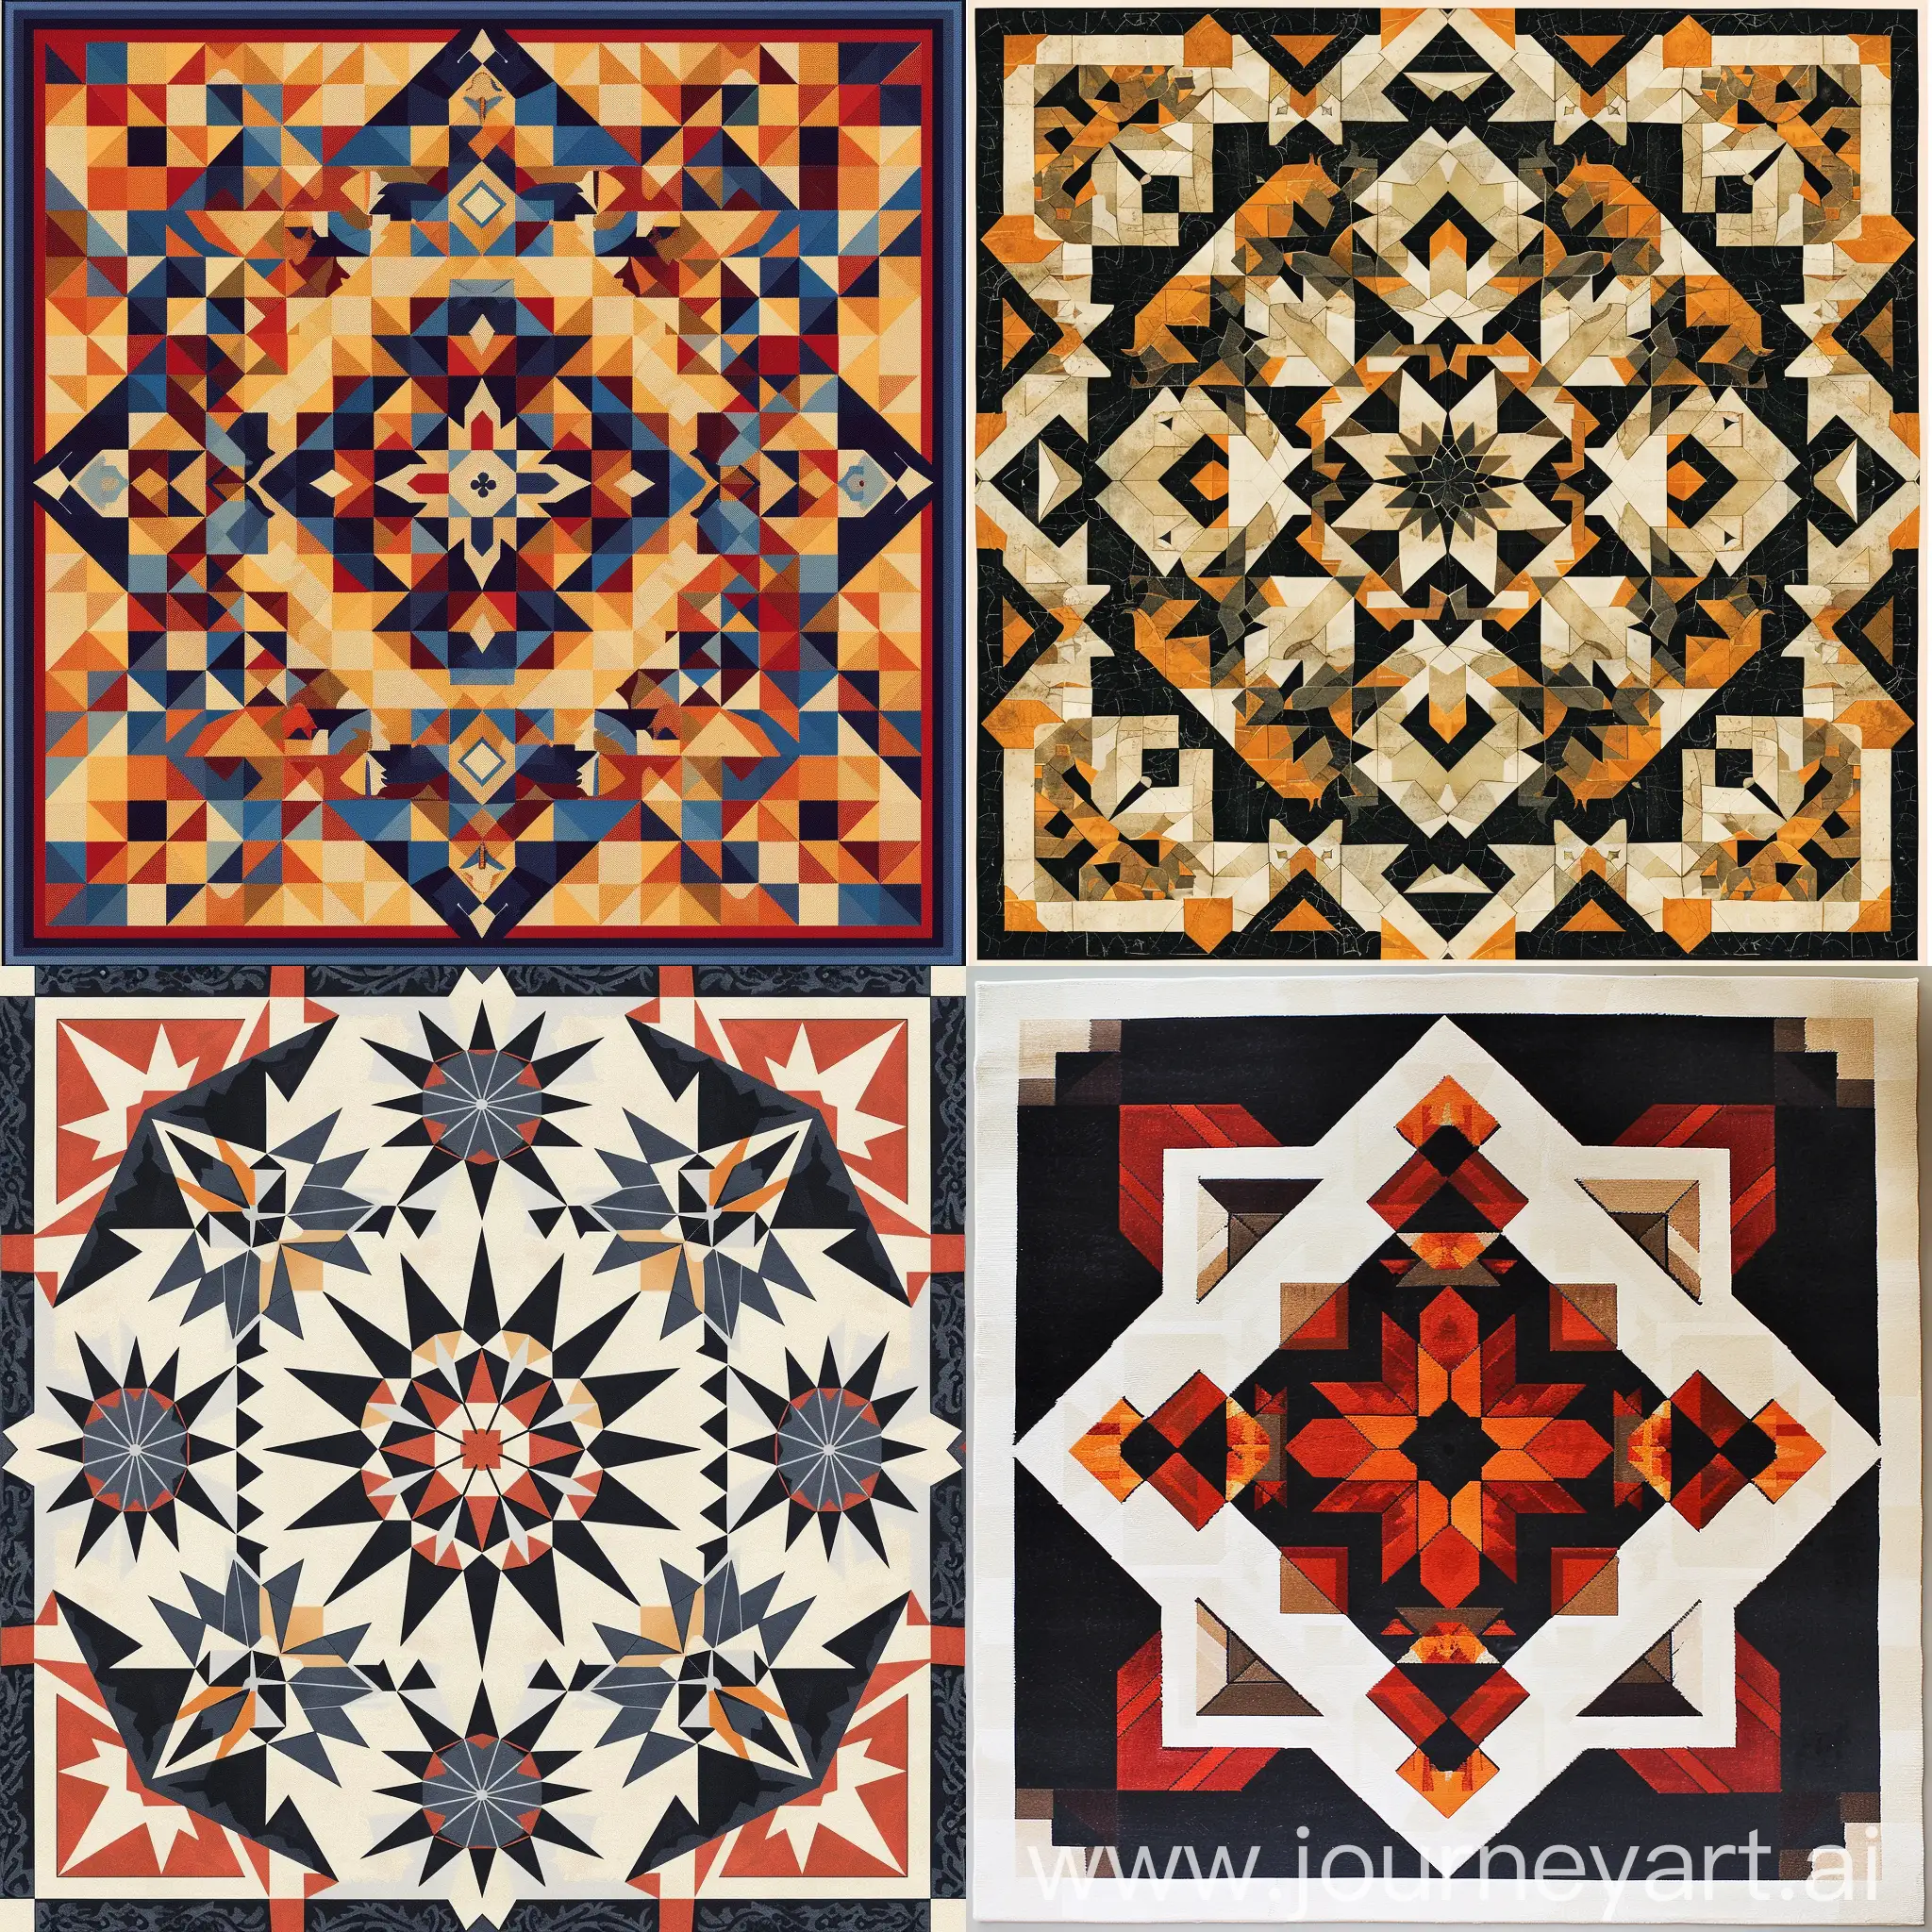 Exquisite-Geometric-Patterns-in-MachineMade-Carpets-Inspired-by-Islamic-and-Arab-Arts